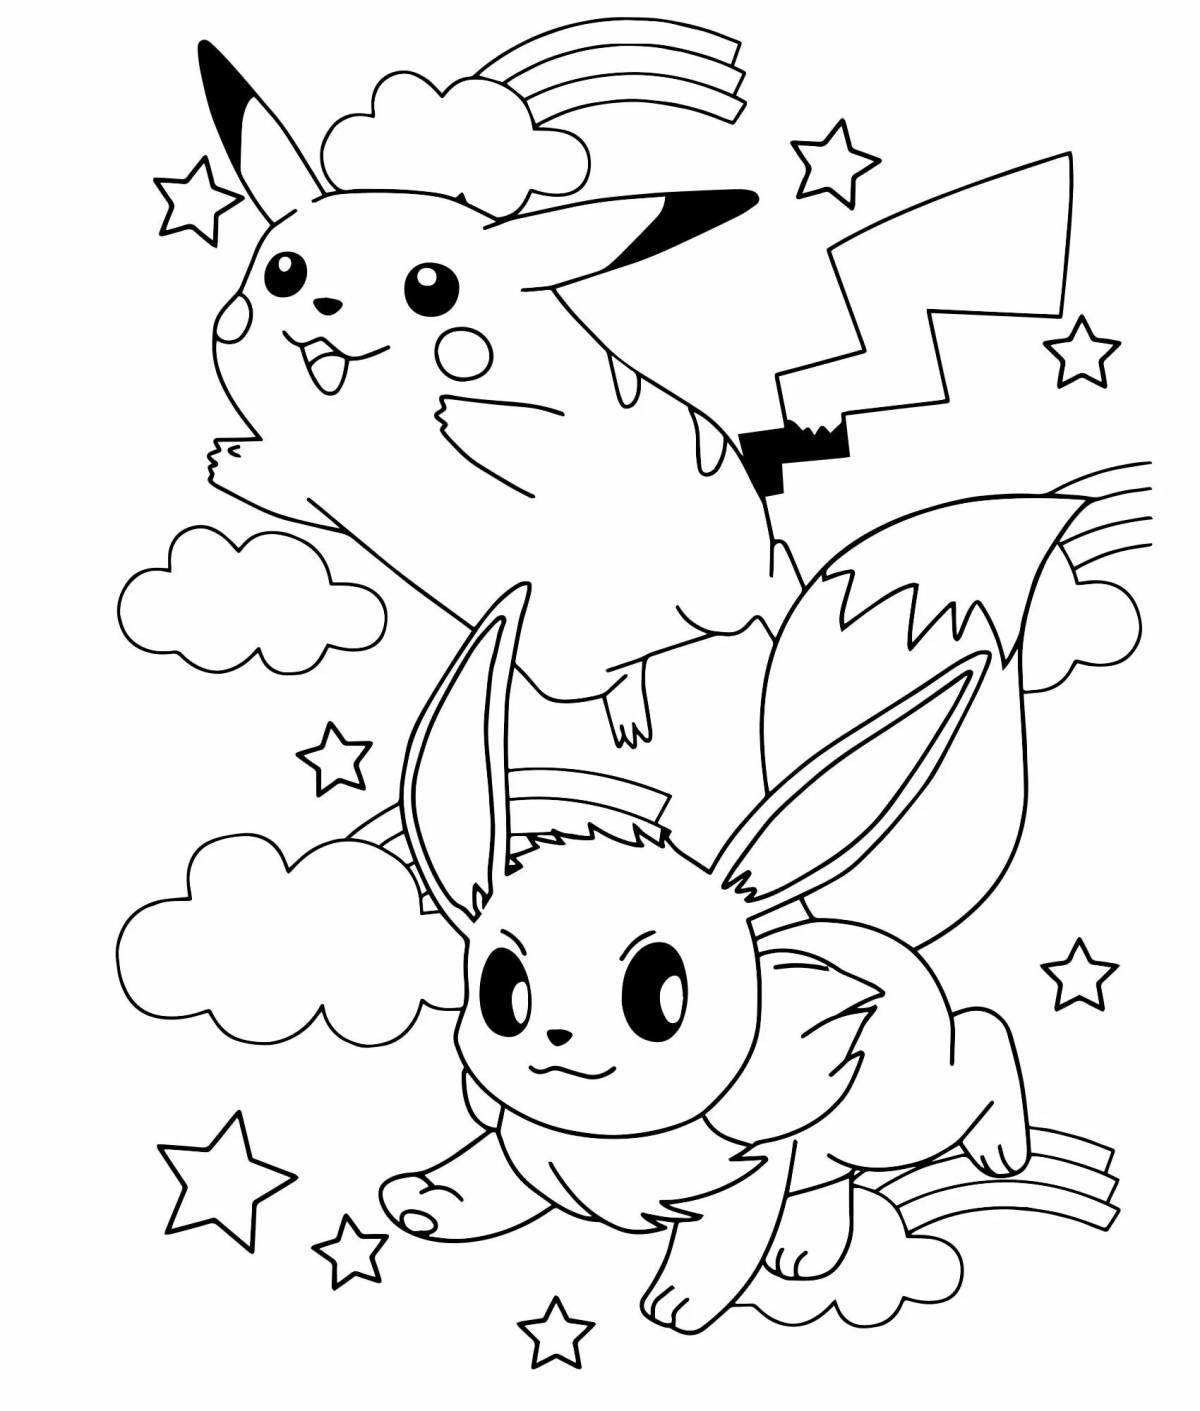 Colorful pikachu and his friends